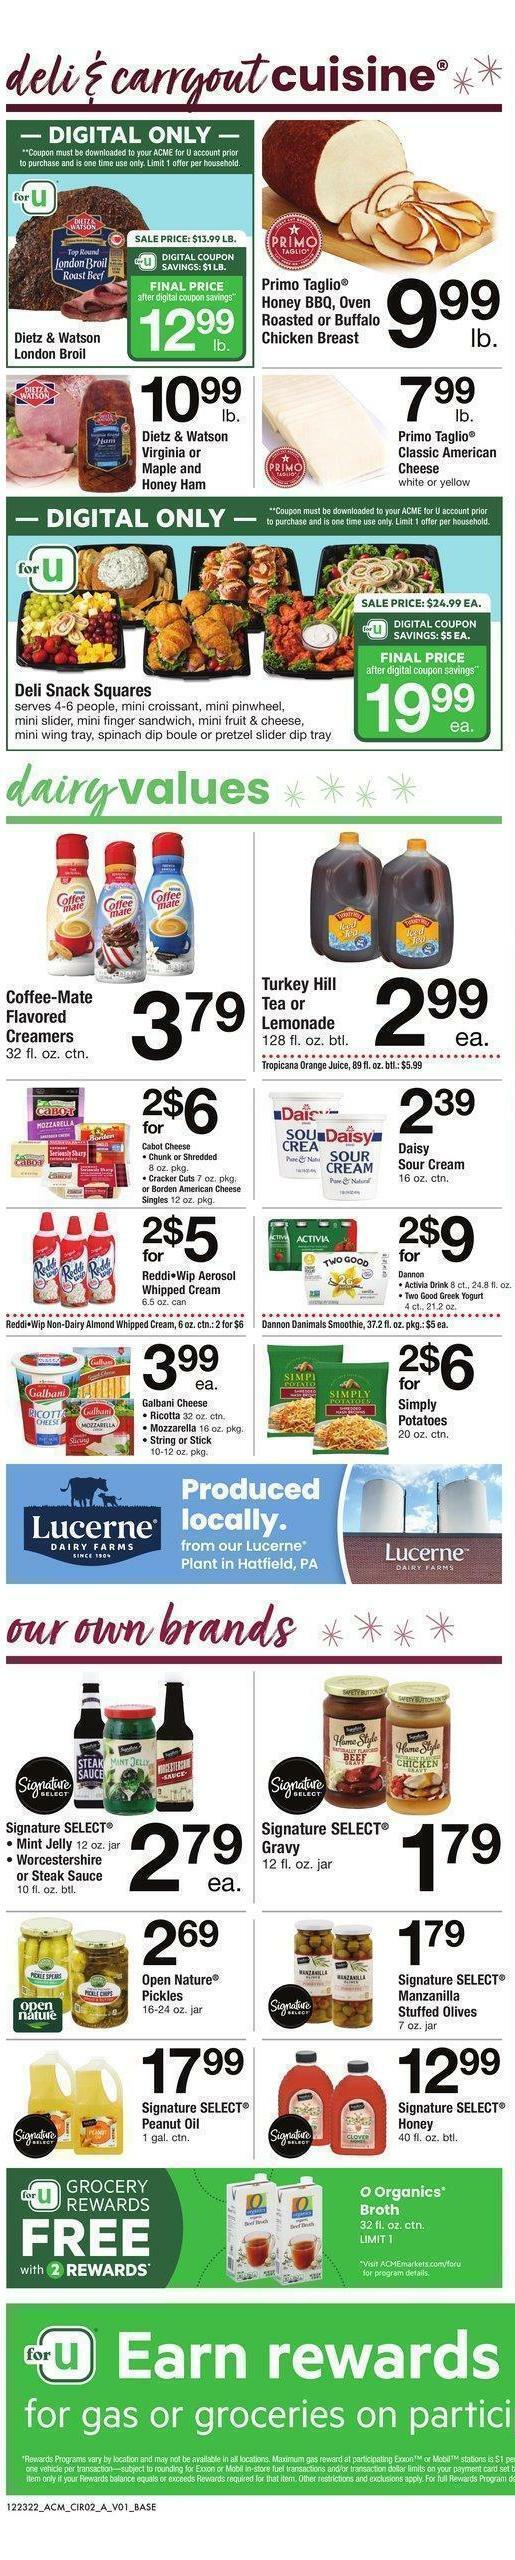 ACME Markets Weekly Ad from December 23